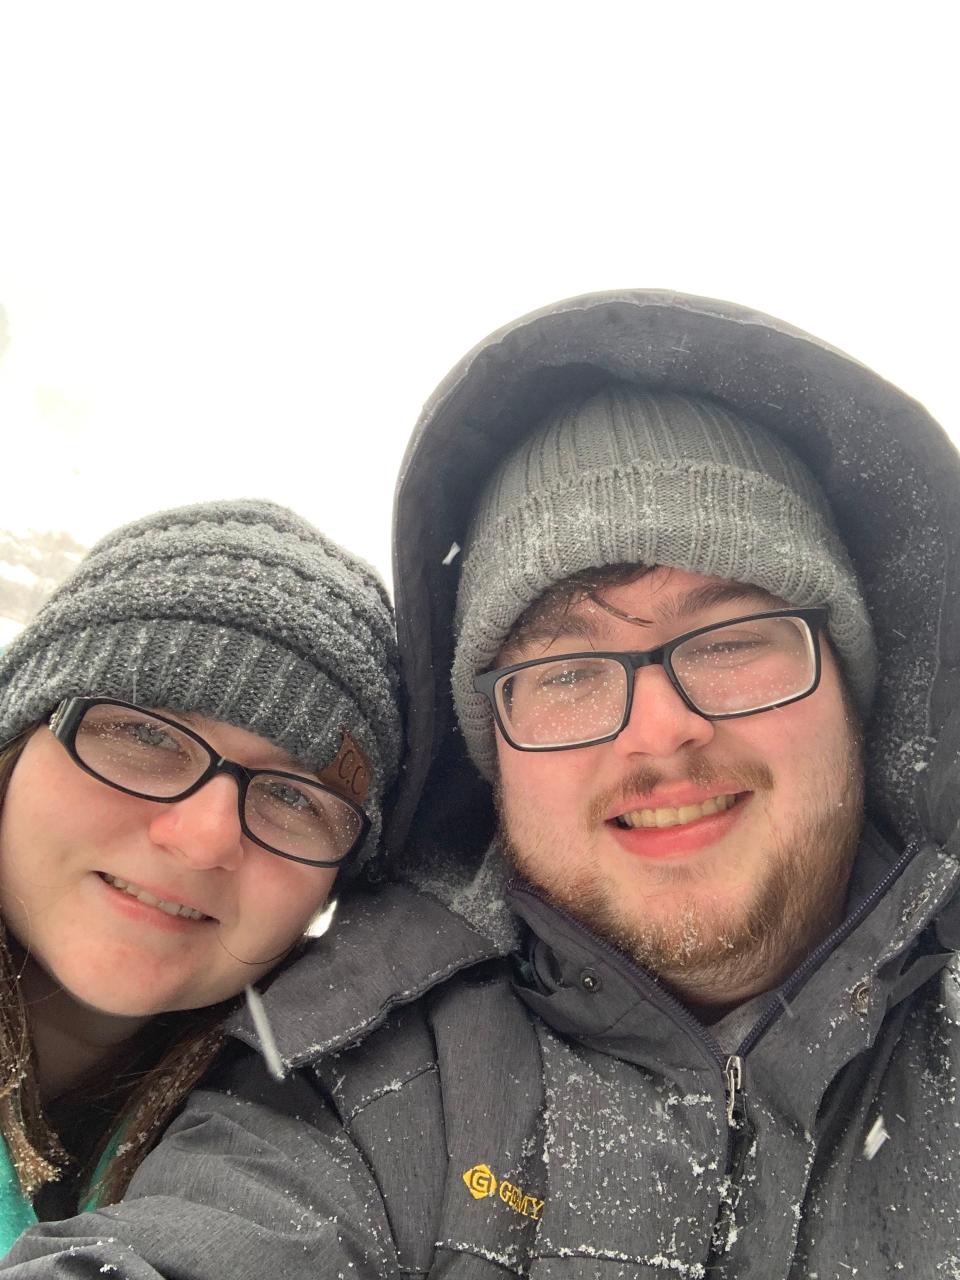 kayla and matthew wilson smiling in the camera in snow gear